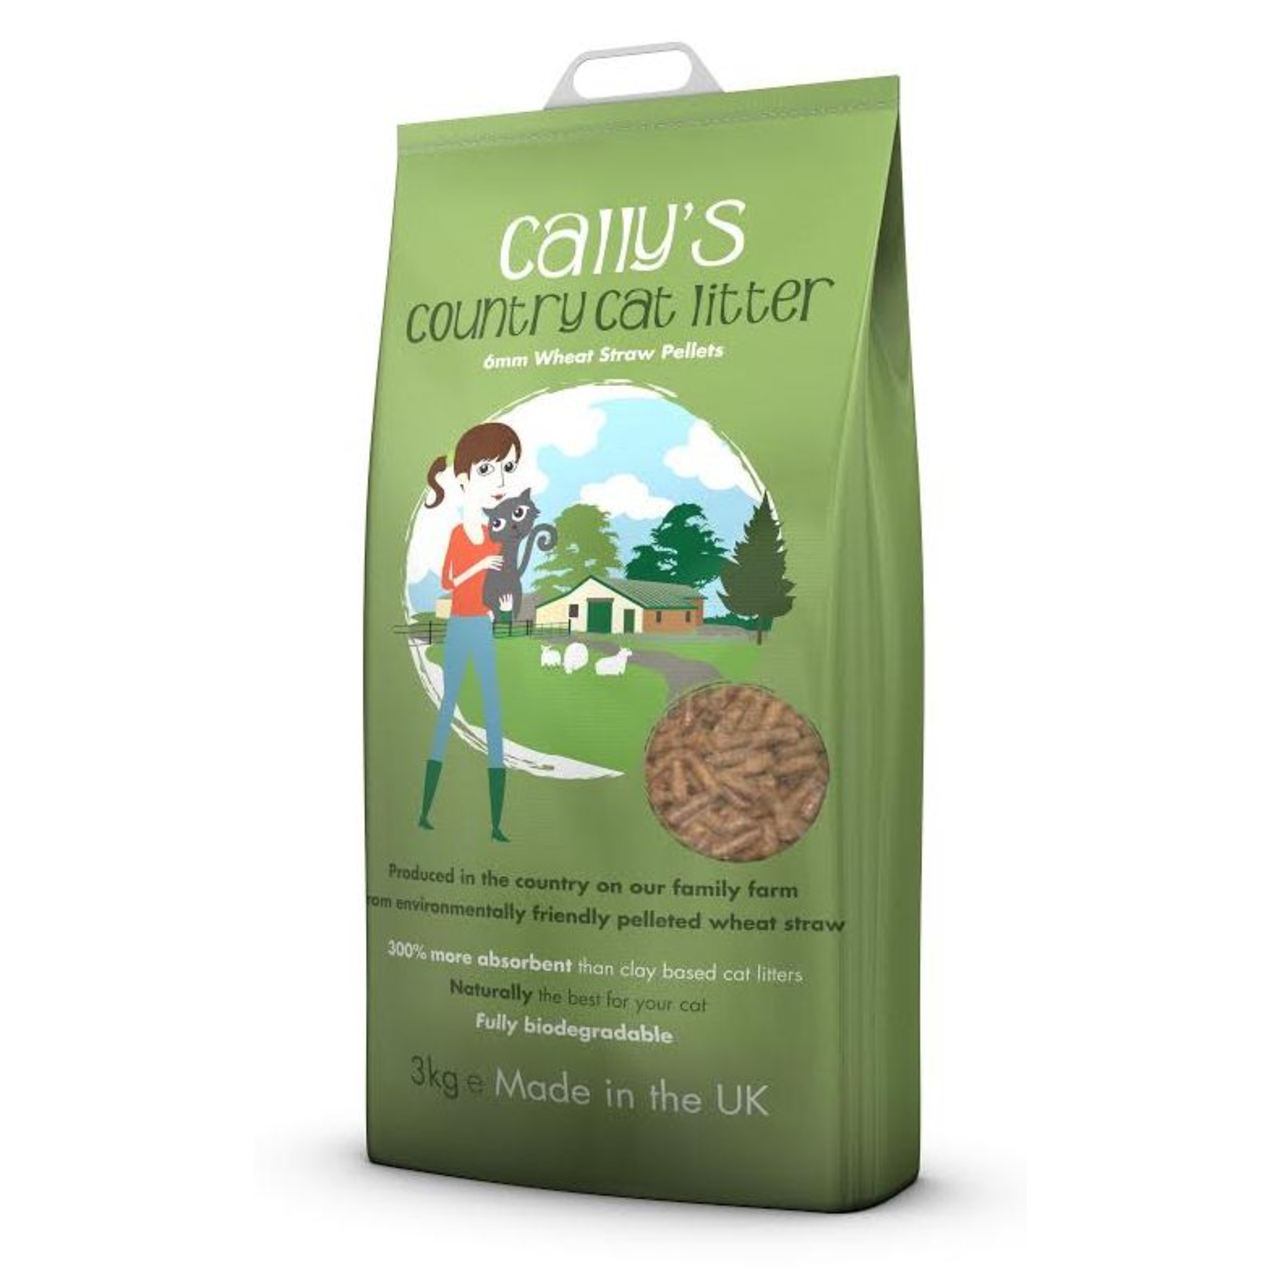 An image of Cally's Country Cat Litter